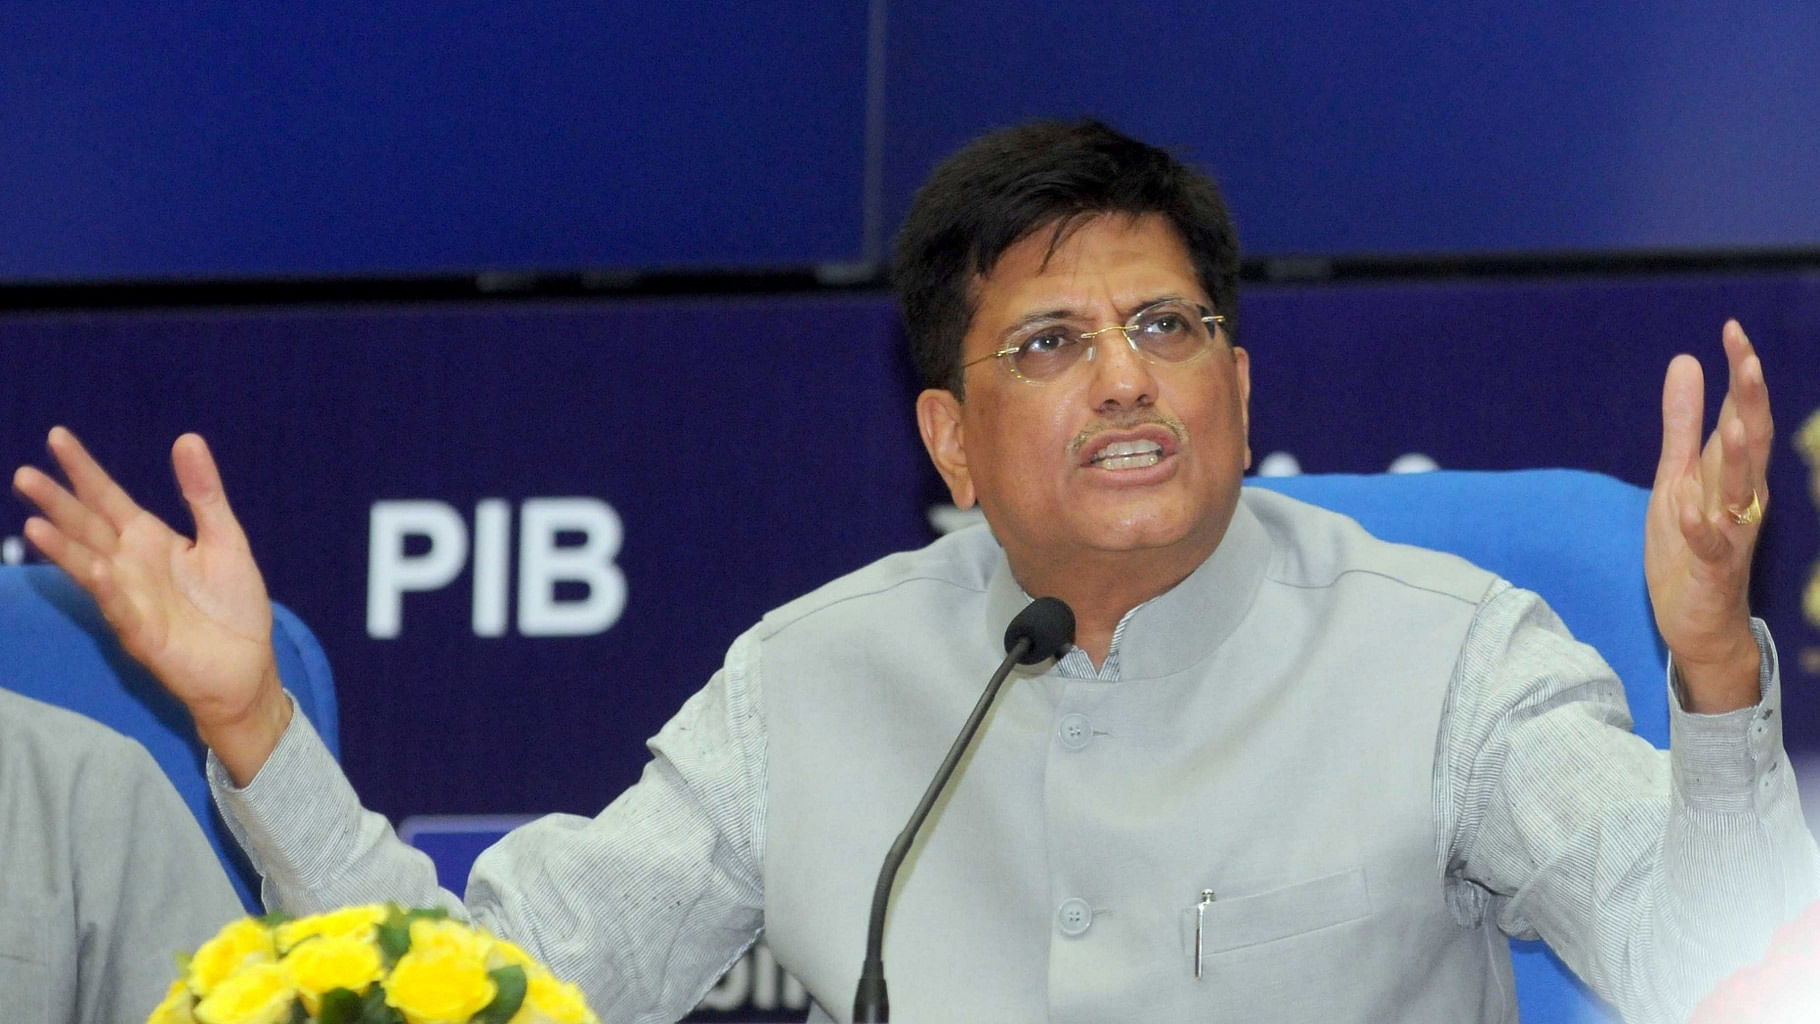  Piyush Goyal, Minister of State for Power, Coal, New and Renewable Energy, India. (Photo: IANS)